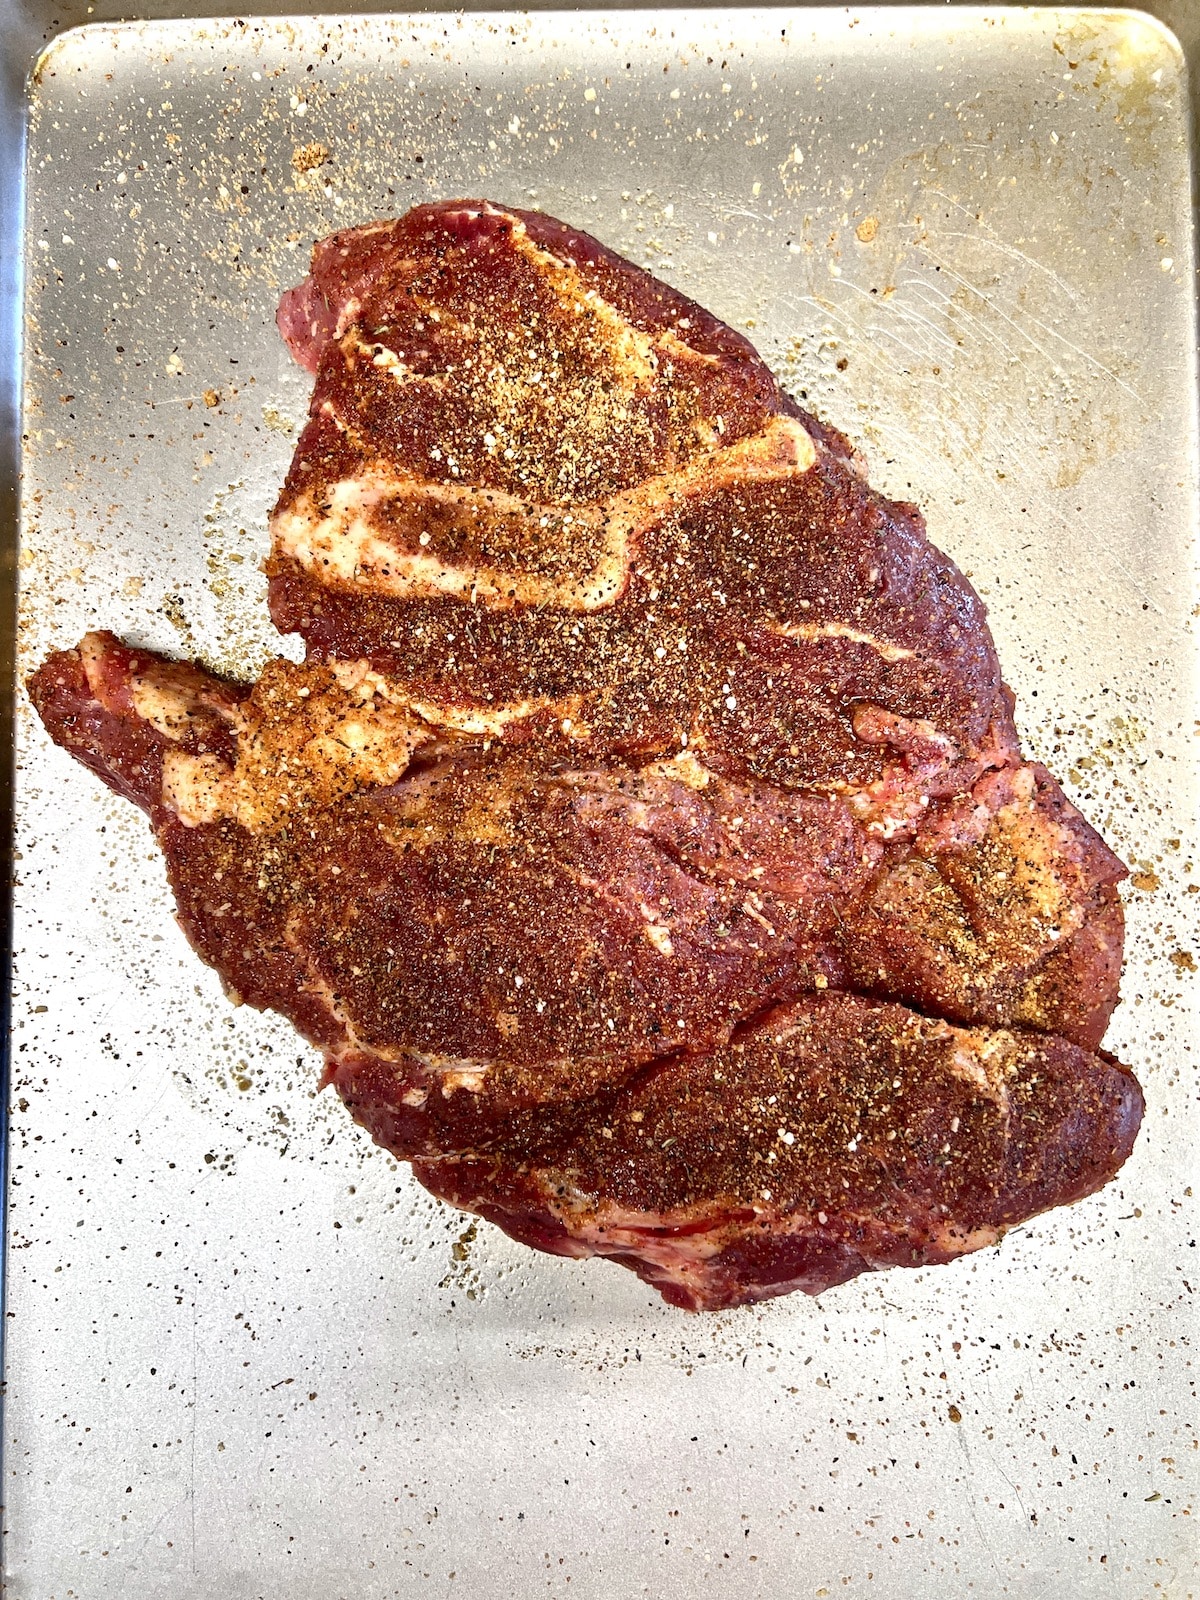 Sirloin steak seasoned with dry rub to grill. 